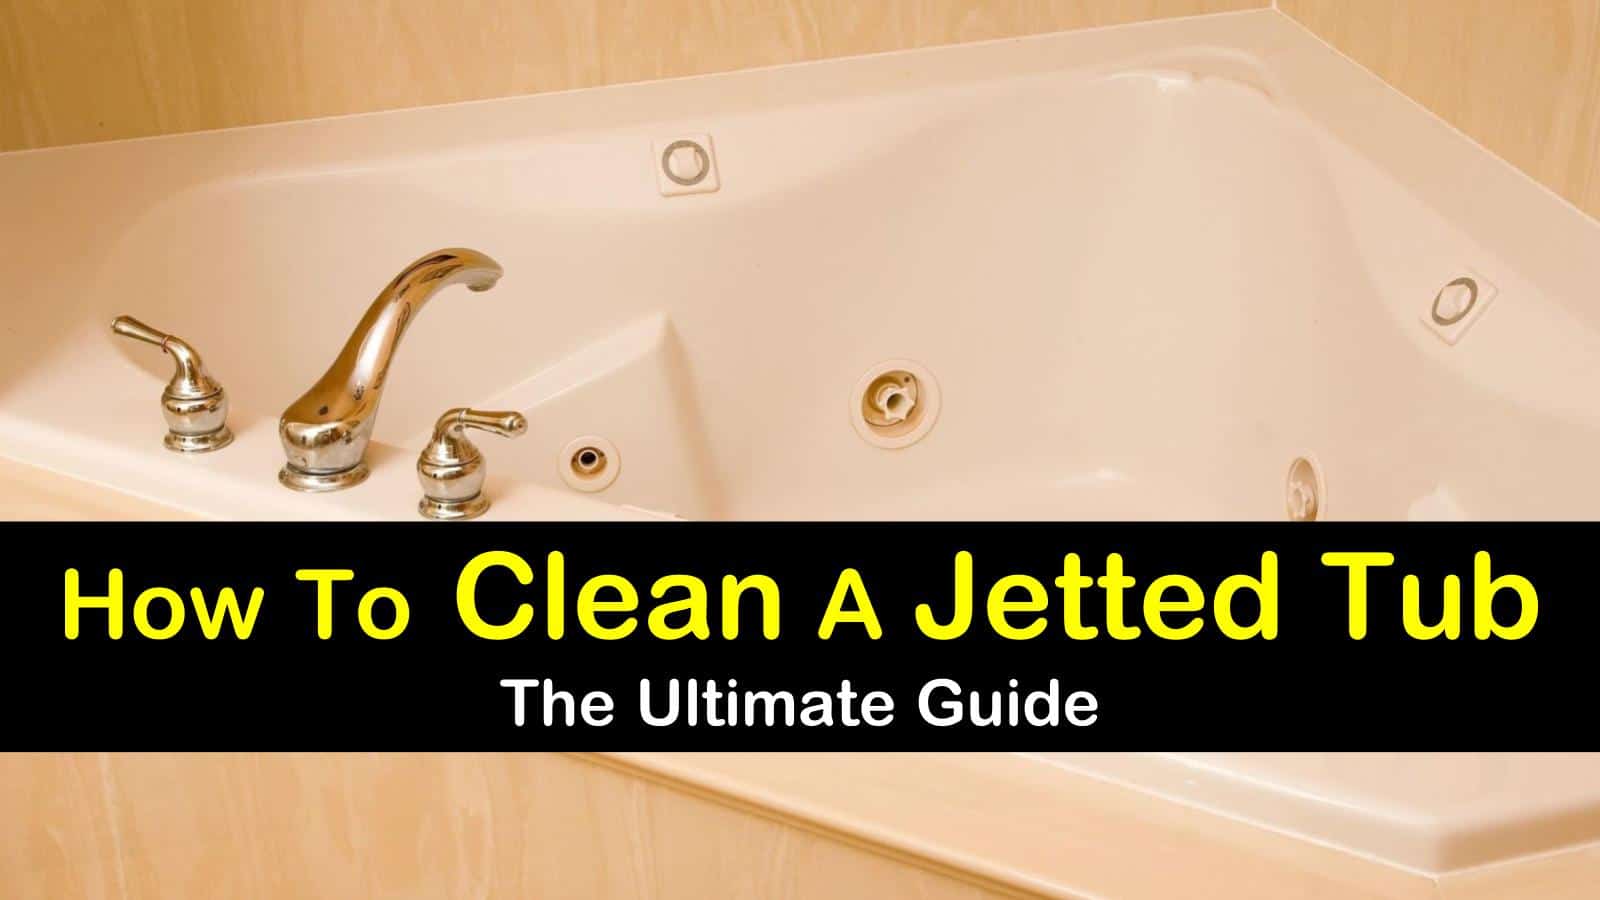 16 Smart & Simple Ways to Clean a Jetted Tub